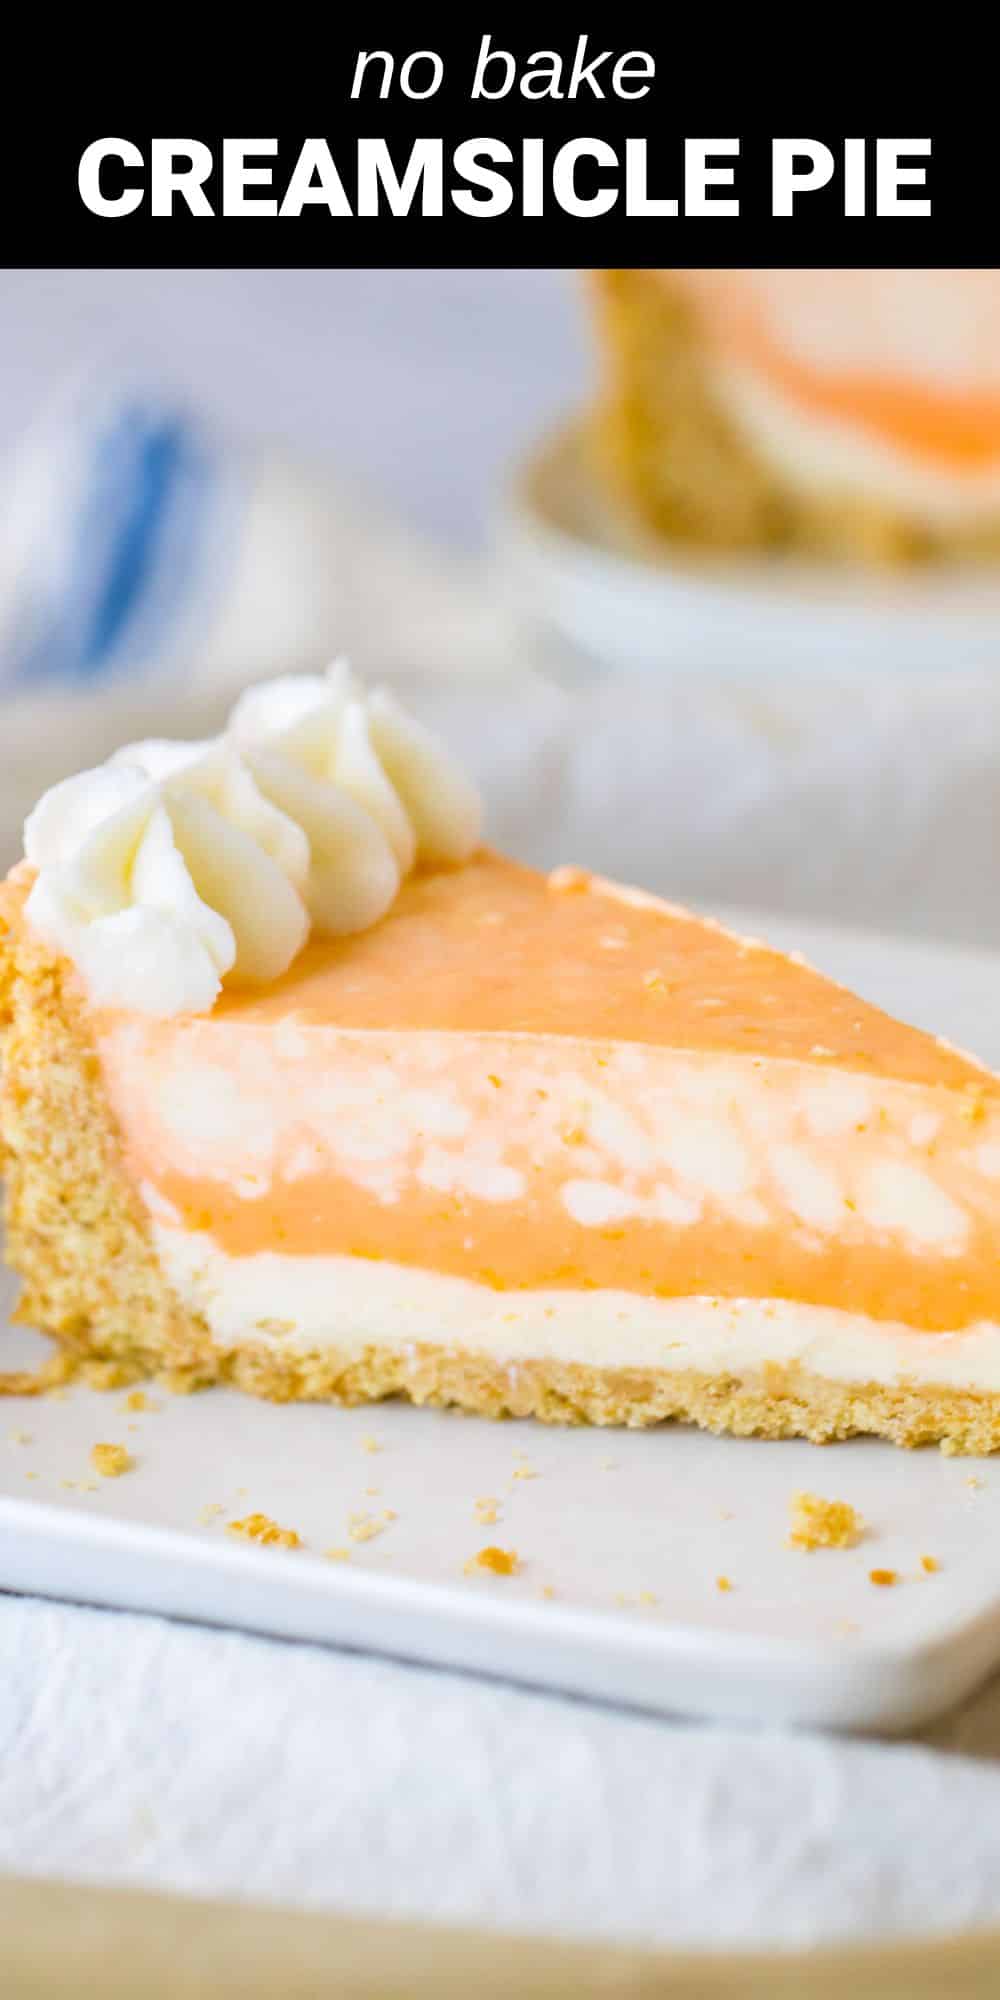 This cool and refreshing Orange Creamsicle Pie is a no-bake wonder that’s the perfect refreshing dessert. Bringing together a layer of tangy orange goodness with a velvety smooth cheesecake layer, this is one citrusy dessert that will be a hit at any gathering.